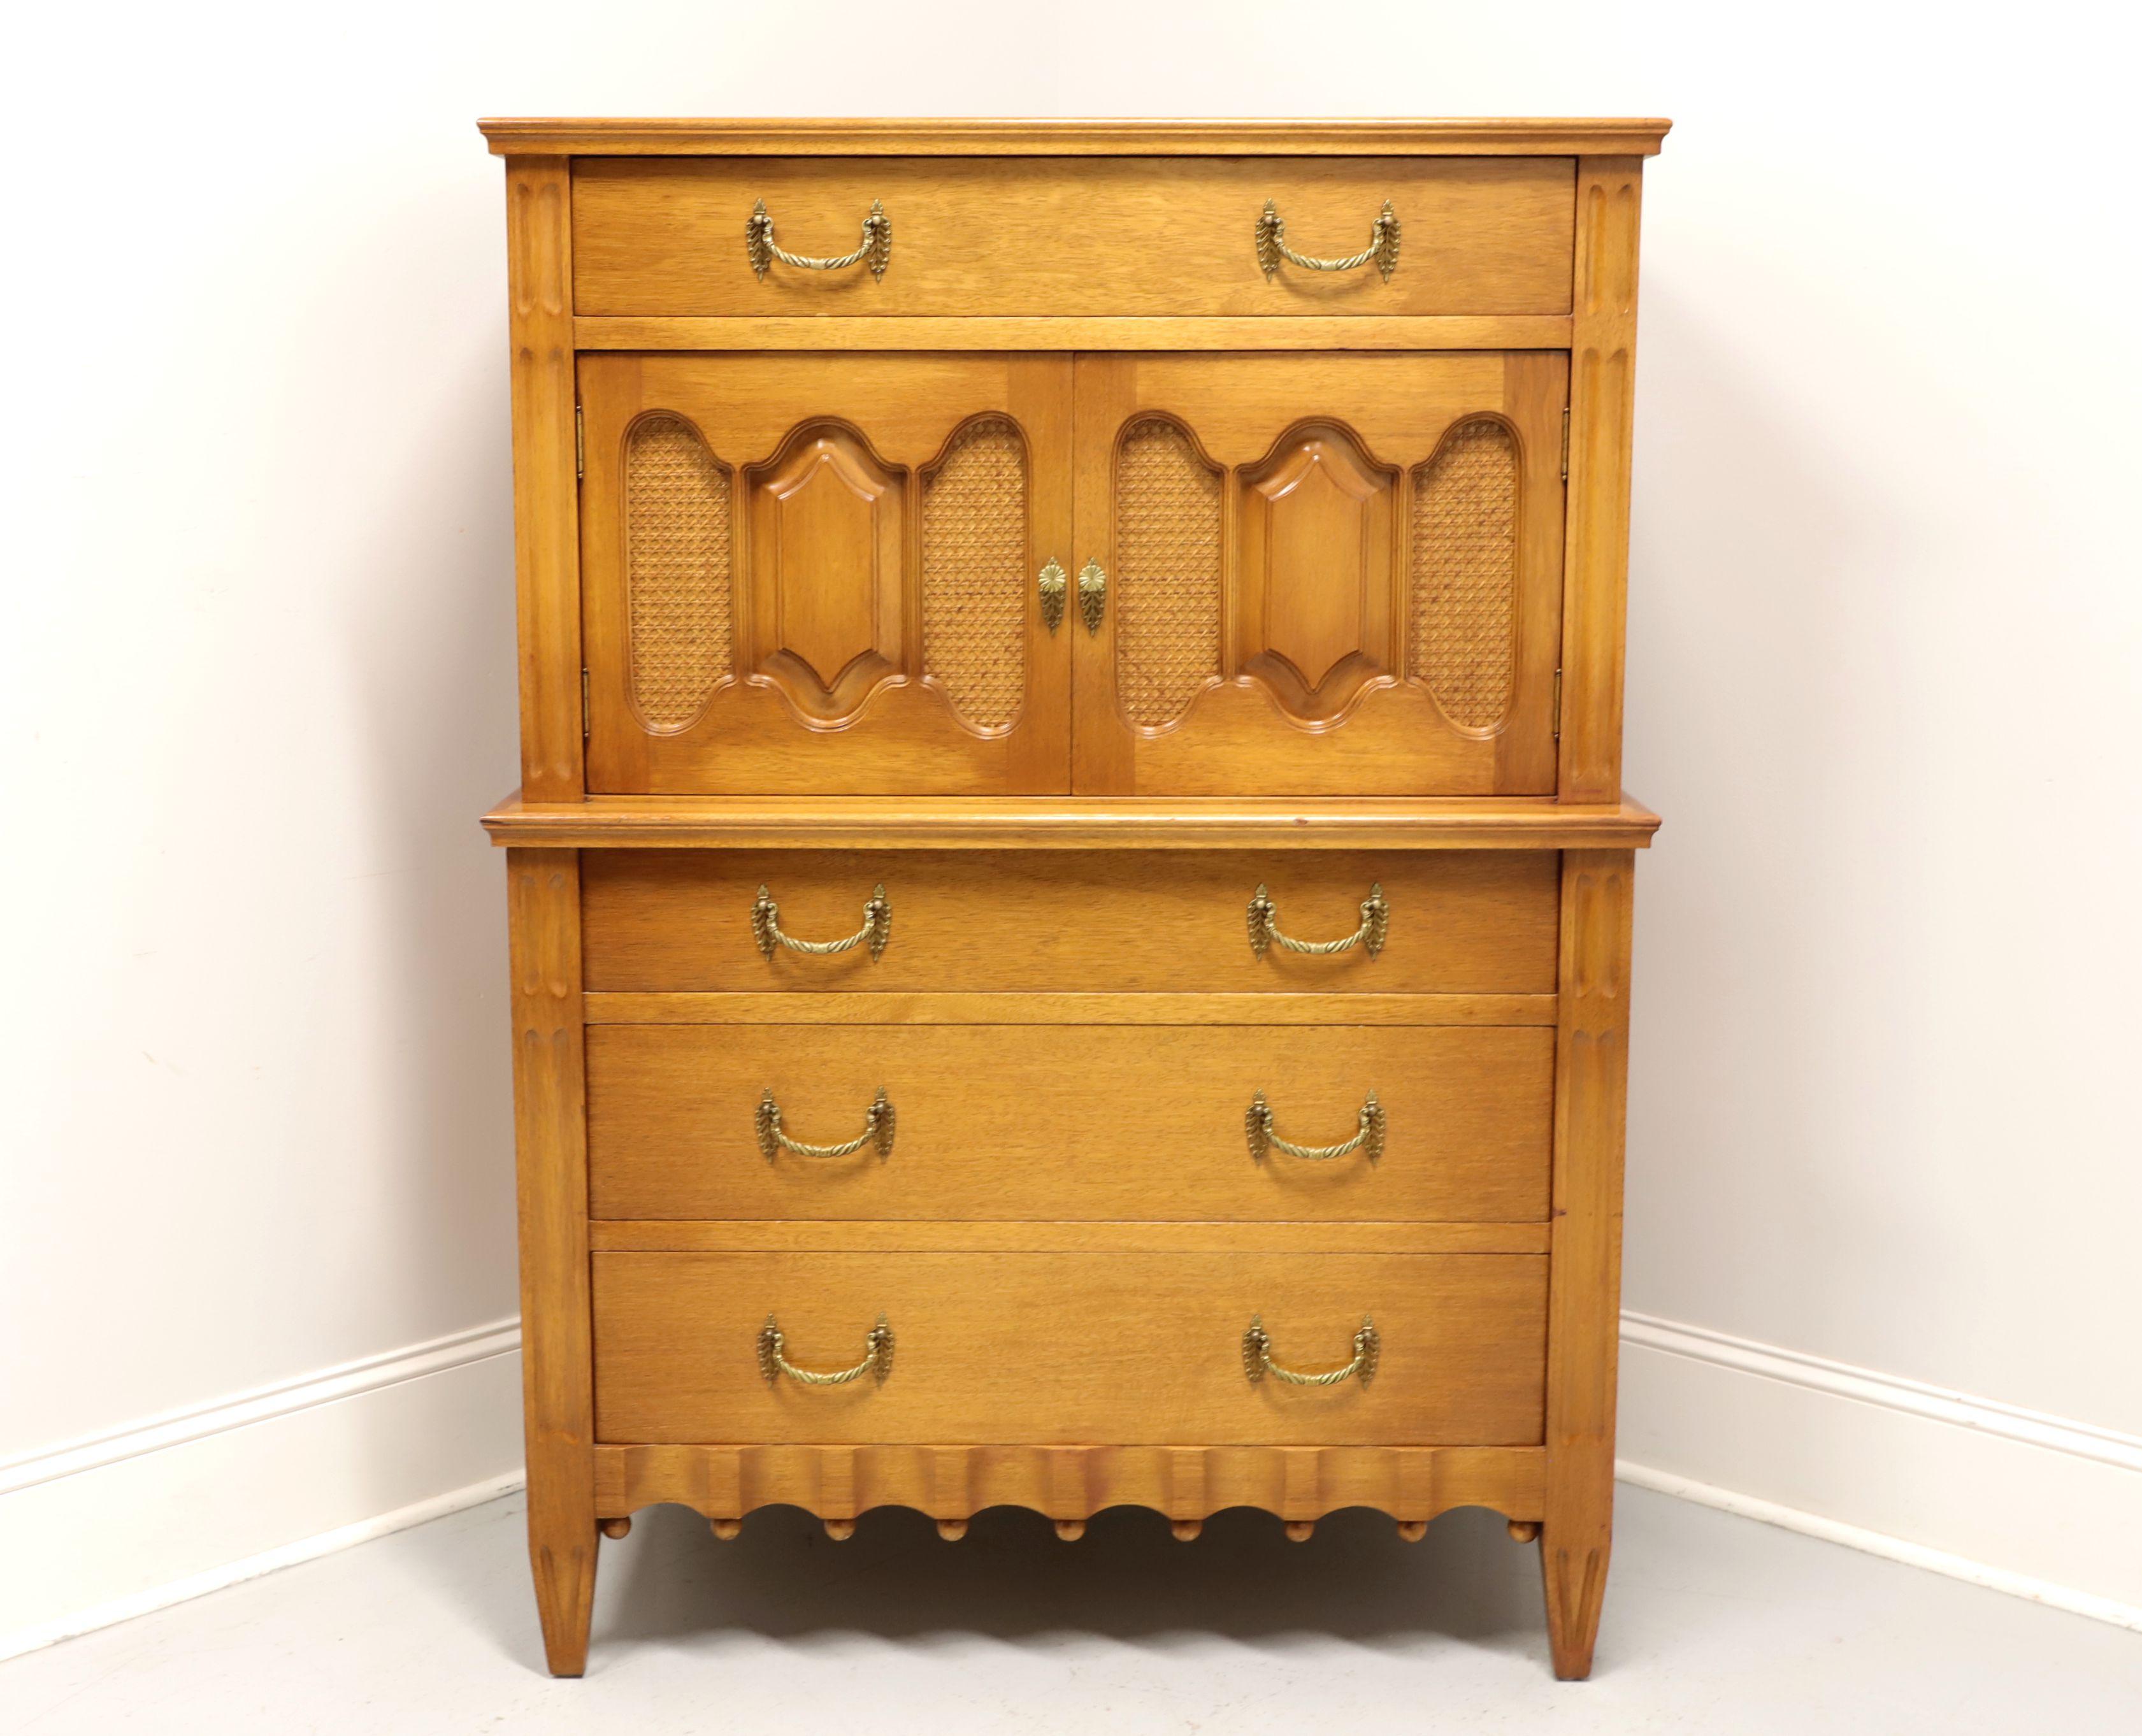 A French Provincial Louis XVI style chest on chest, unbranded. Hardwood with decorative brass hardware, fluted sides, cane inserts to door panels, decorative apron and tapered legs. Features upper portion with one dovetail drawer over a two door